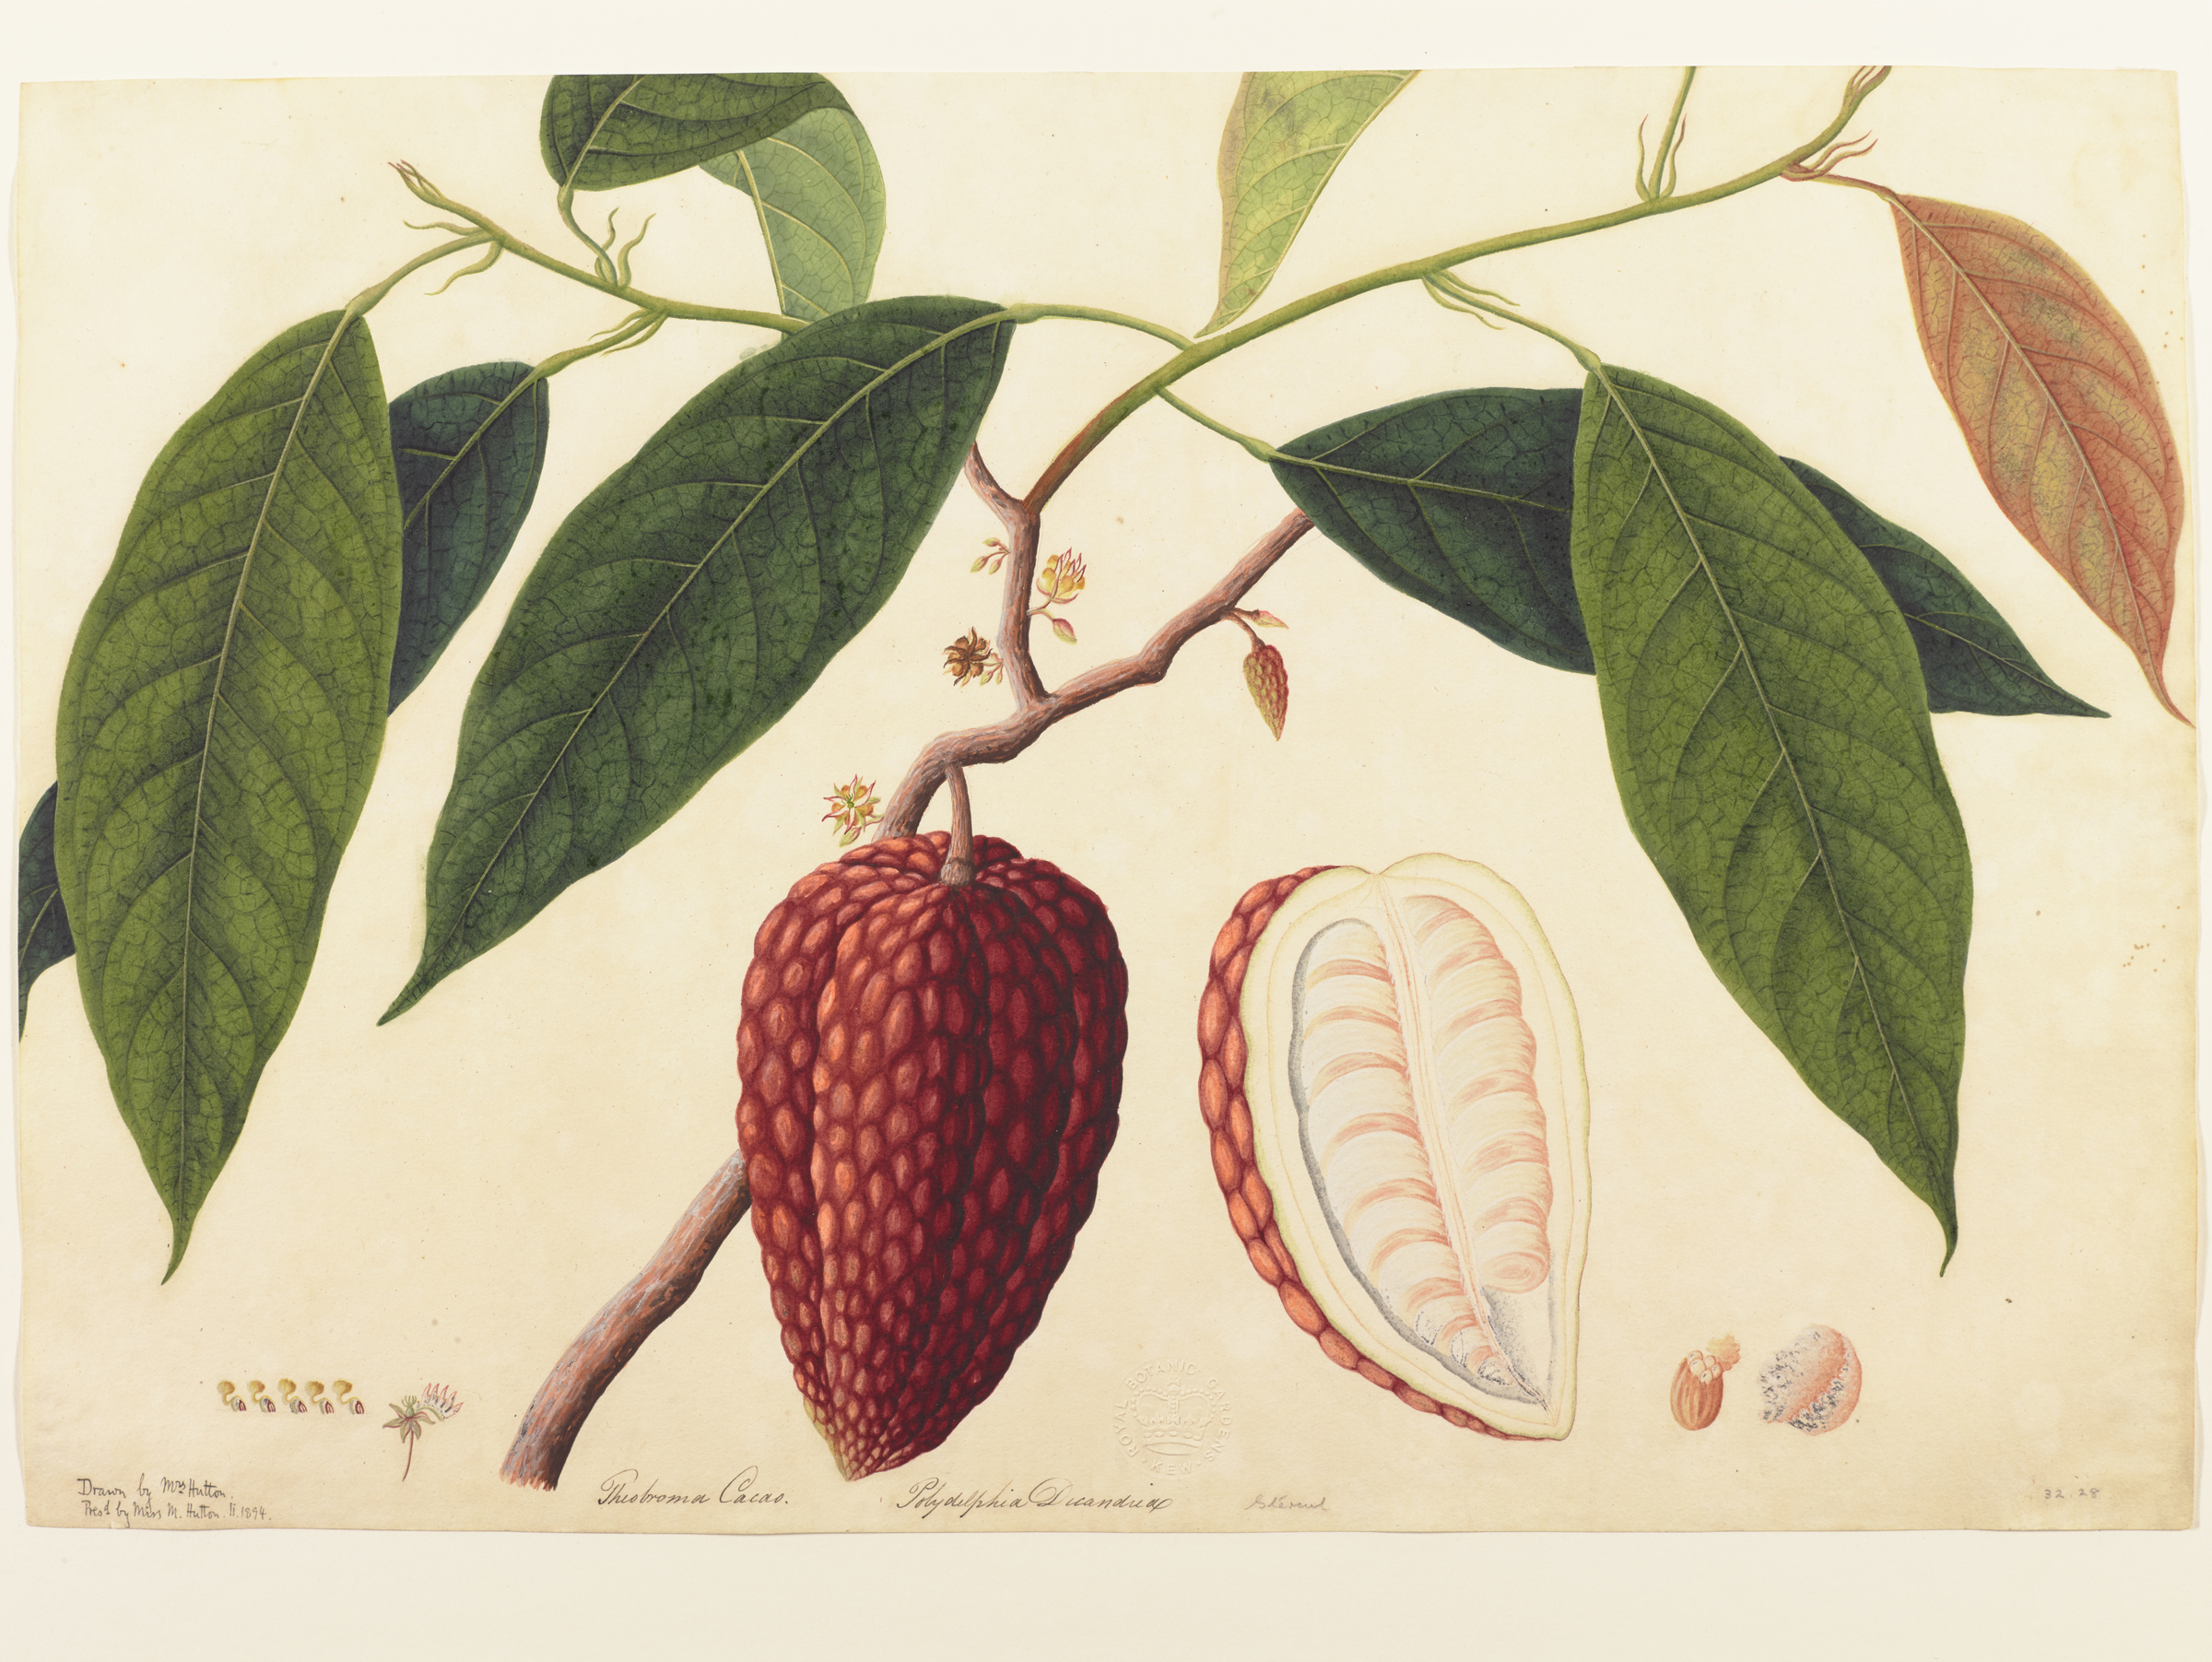 A detailed illustration of a cacao plant shows the elongated leaves and a dissected pod hung from the stem. The artist has also shown the inside of the pod, containing the famous cacao beans. 